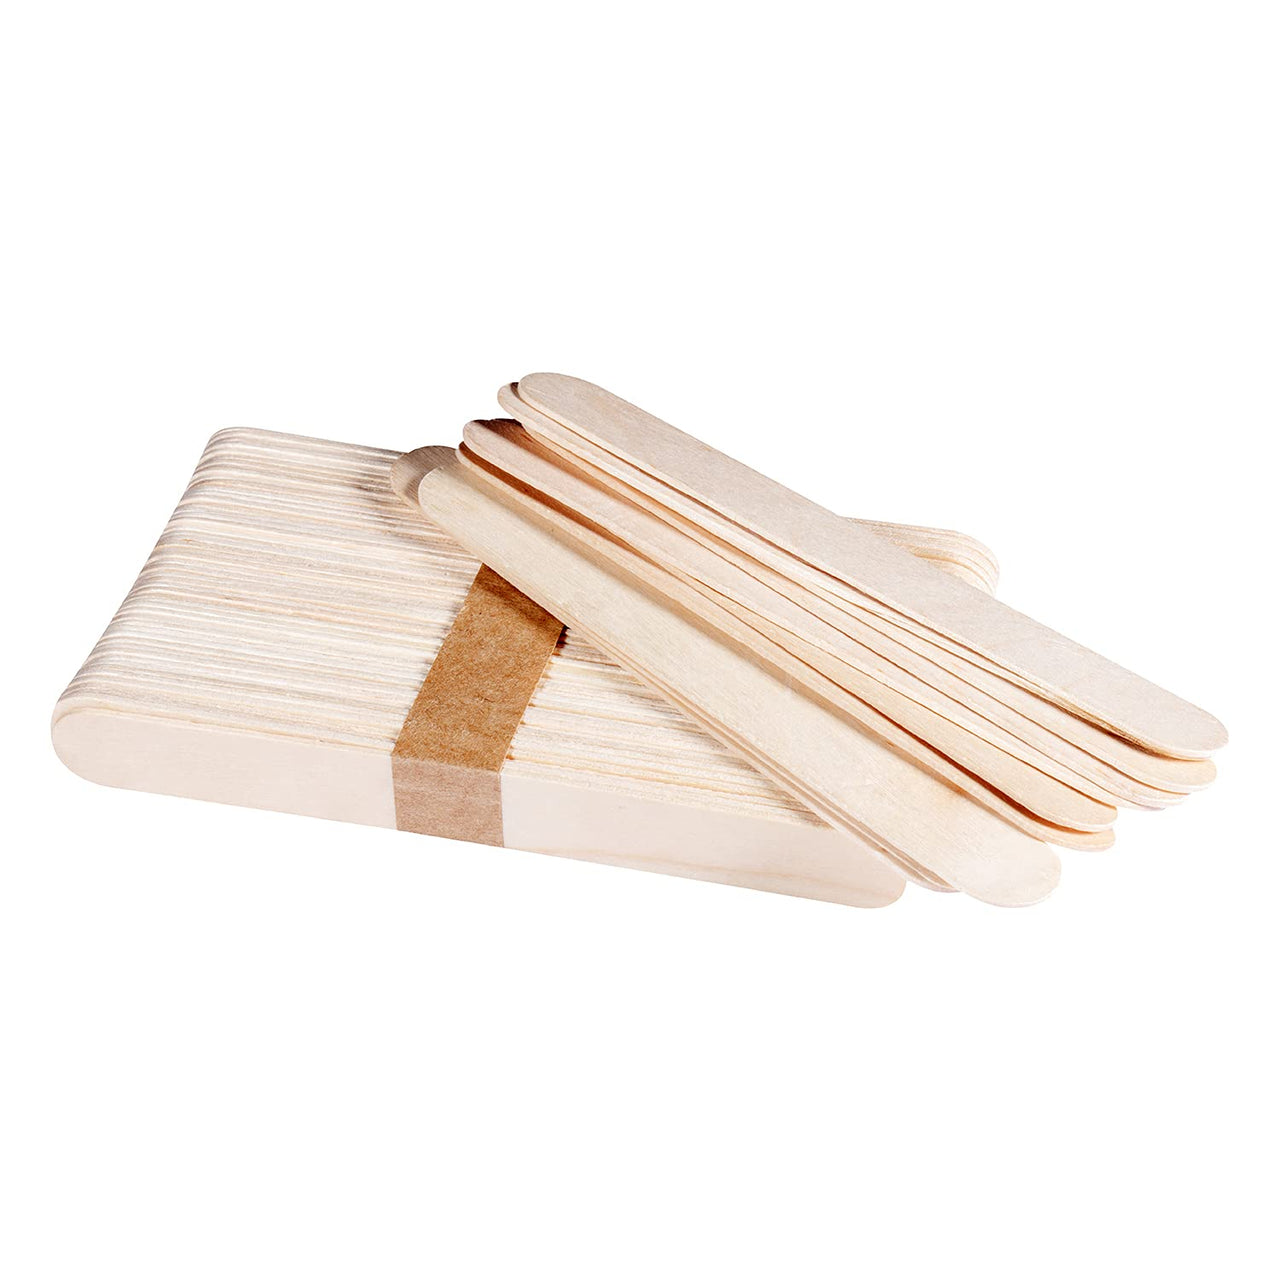  Spa Stix Large Waxing Sticks. Natural Wood Body Hair Removal  Sticks Applicator. Size is 6 Inches x 3/4. Wooden Waxing Sticks. Pack of  500Count : Beauty & Personal Care